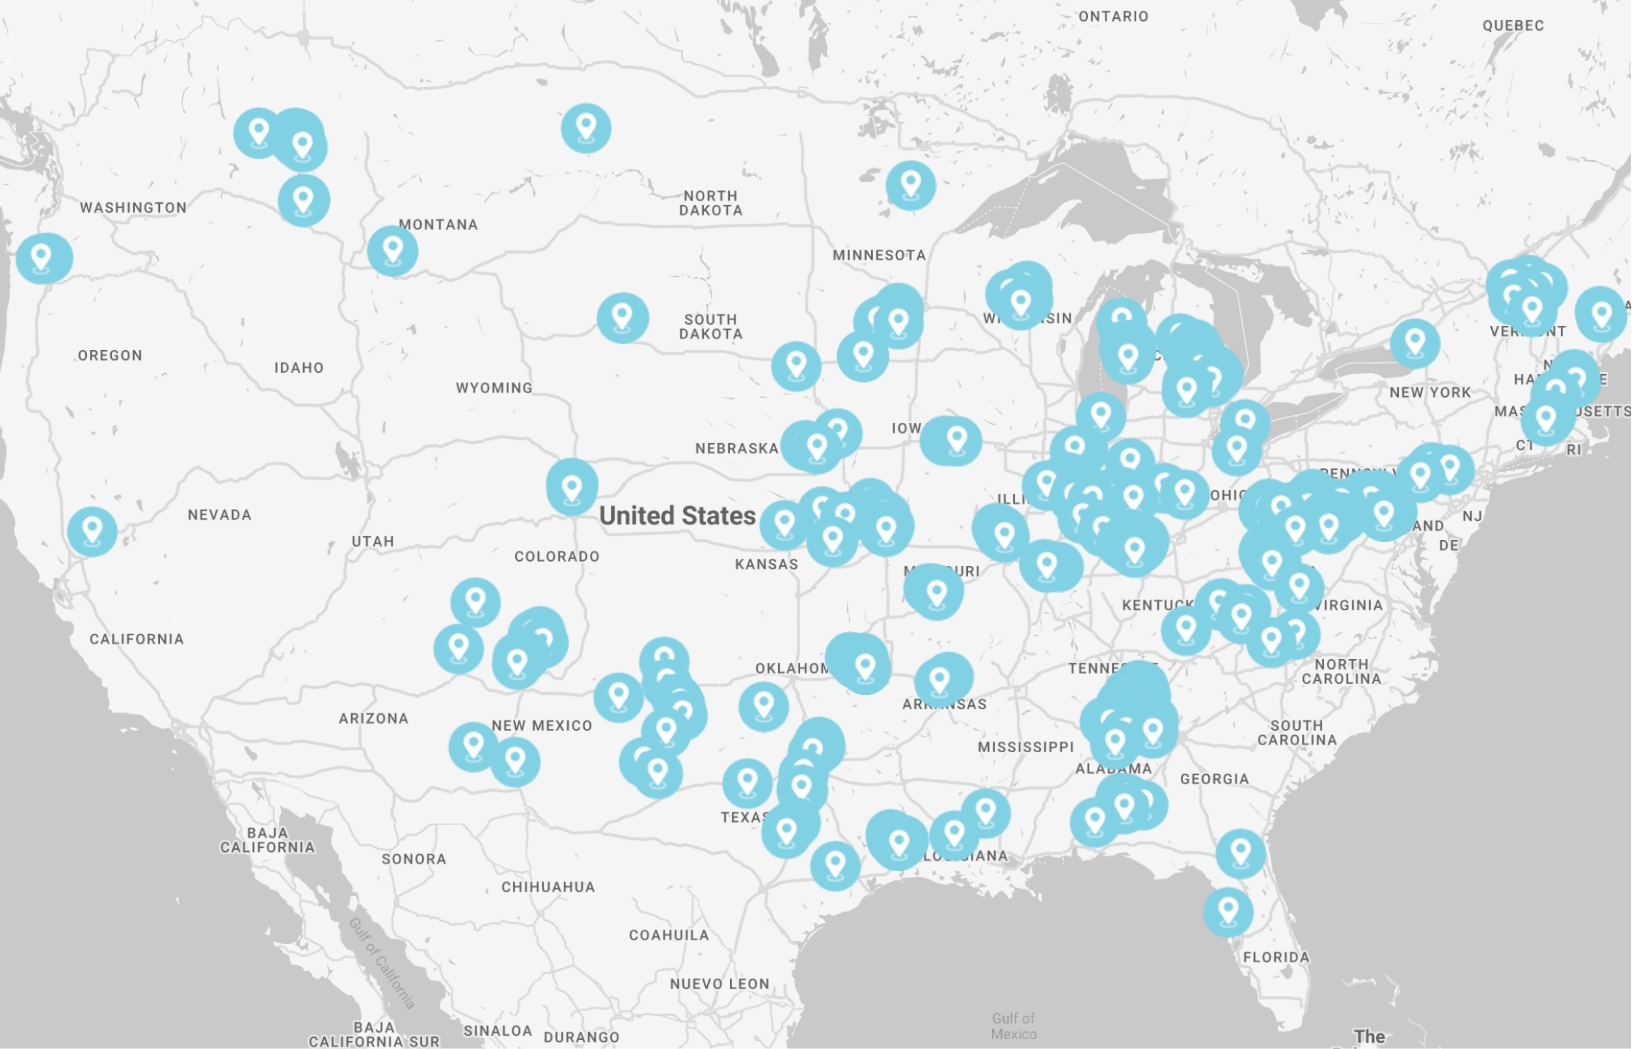 Find an event near you map